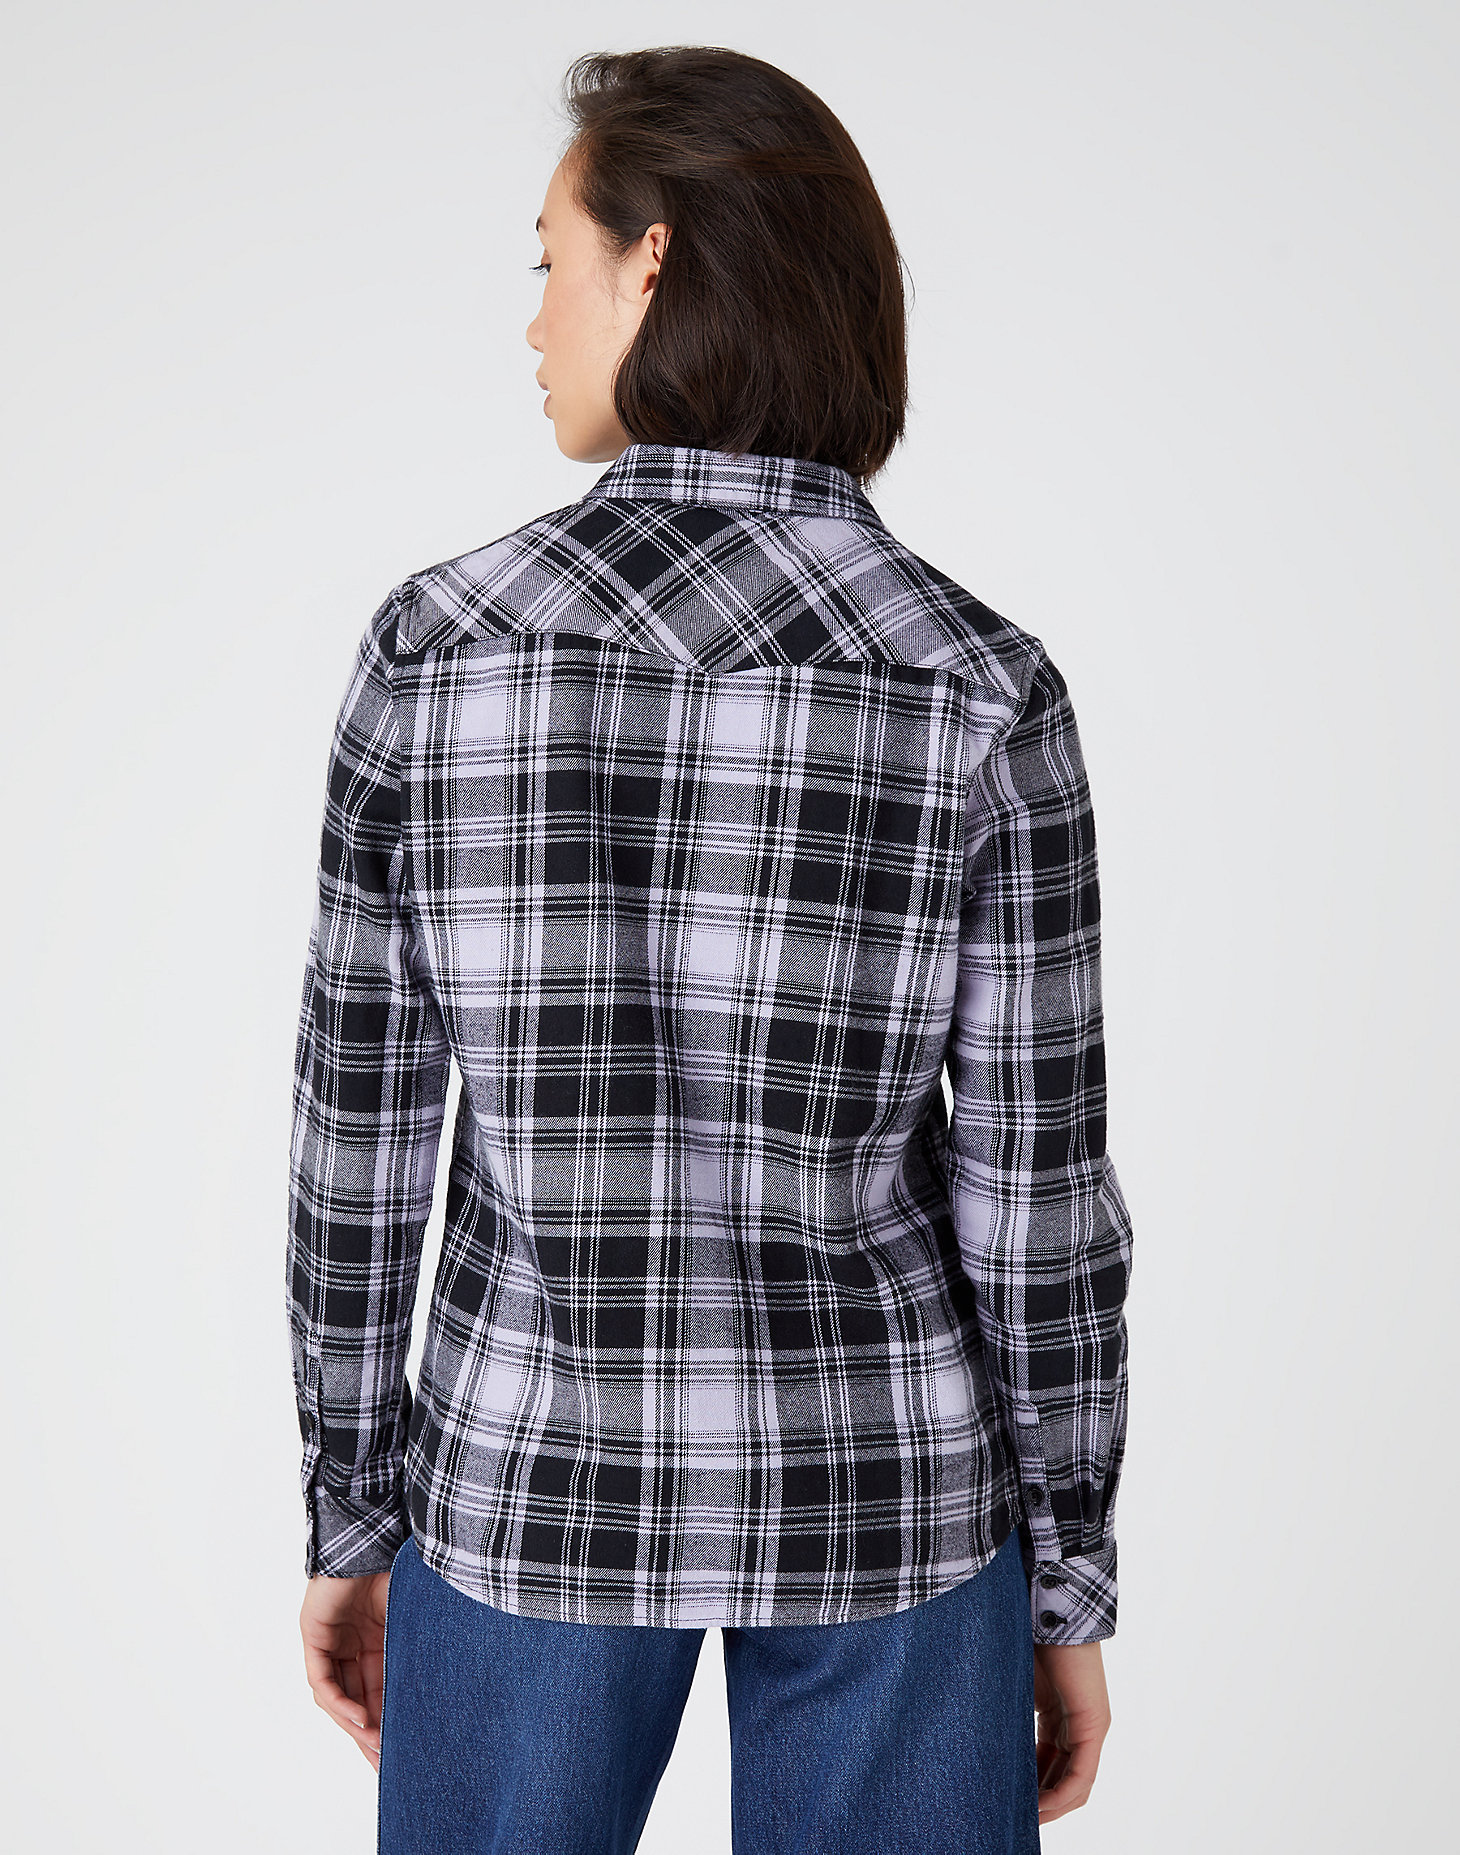 Western Check Shirt in Heirloom Lilac alternative view 2